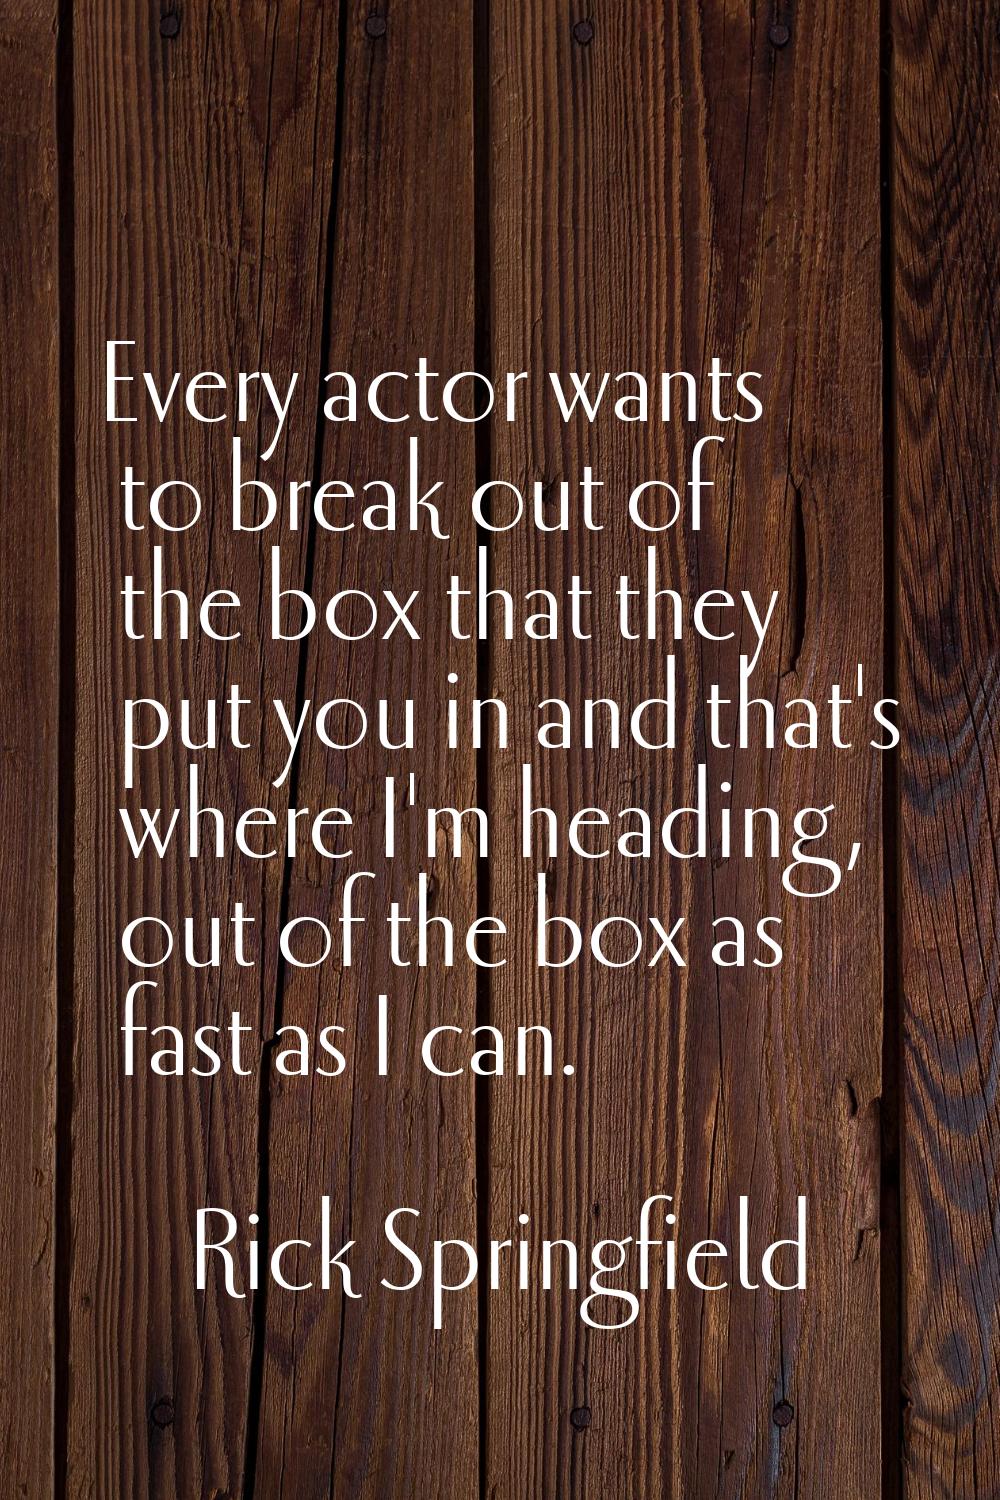 Every actor wants to break out of the box that they put you in and that's where I'm heading, out of